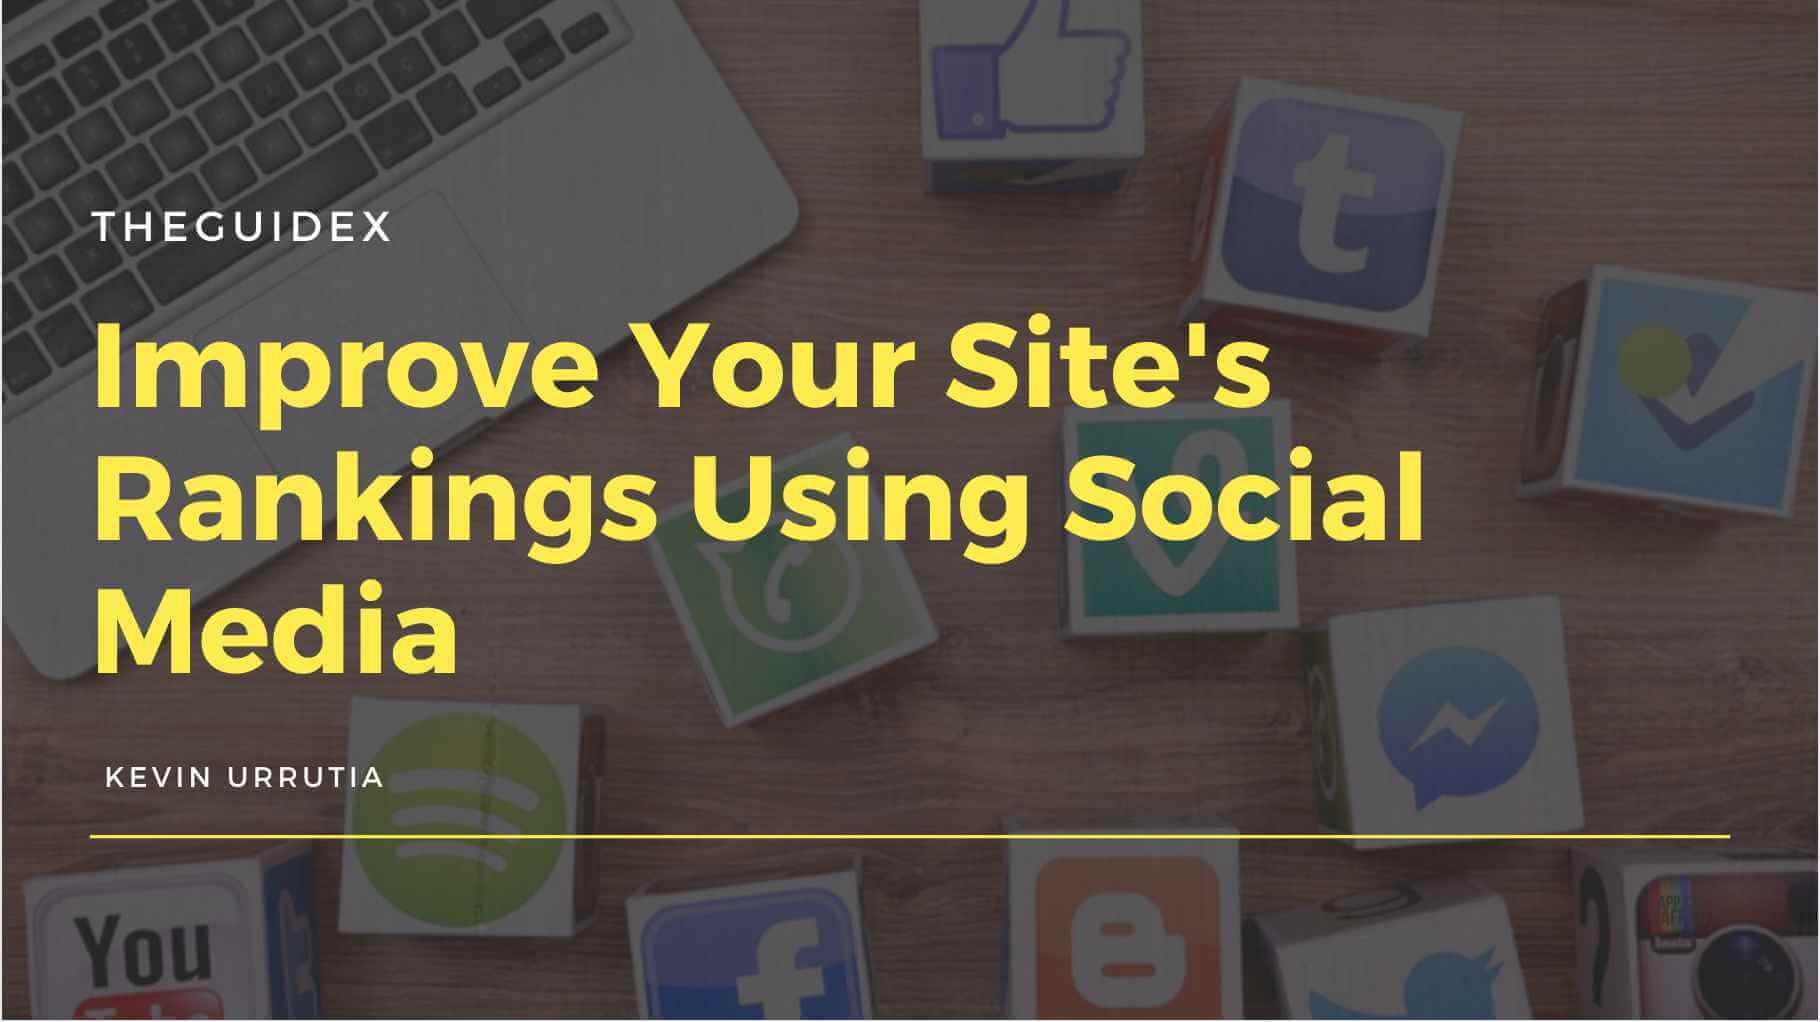 9 Ways to Improve Your Site’s Rankings Using Social Media